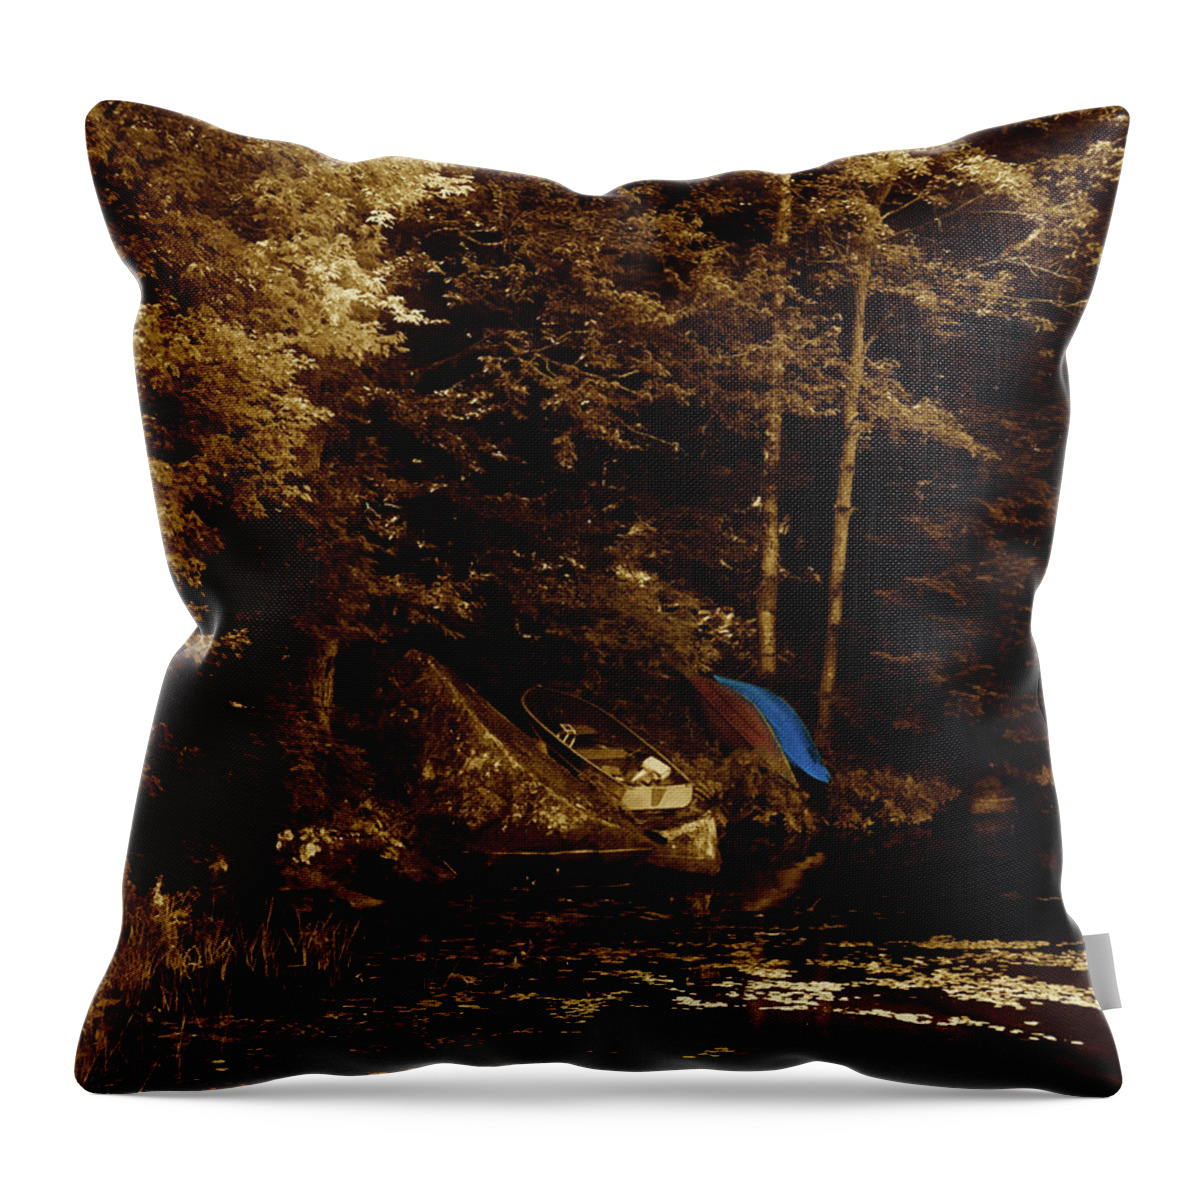 Canoe Throw Pillow featuring the digital art Summer Obsession by JGracey Stinson